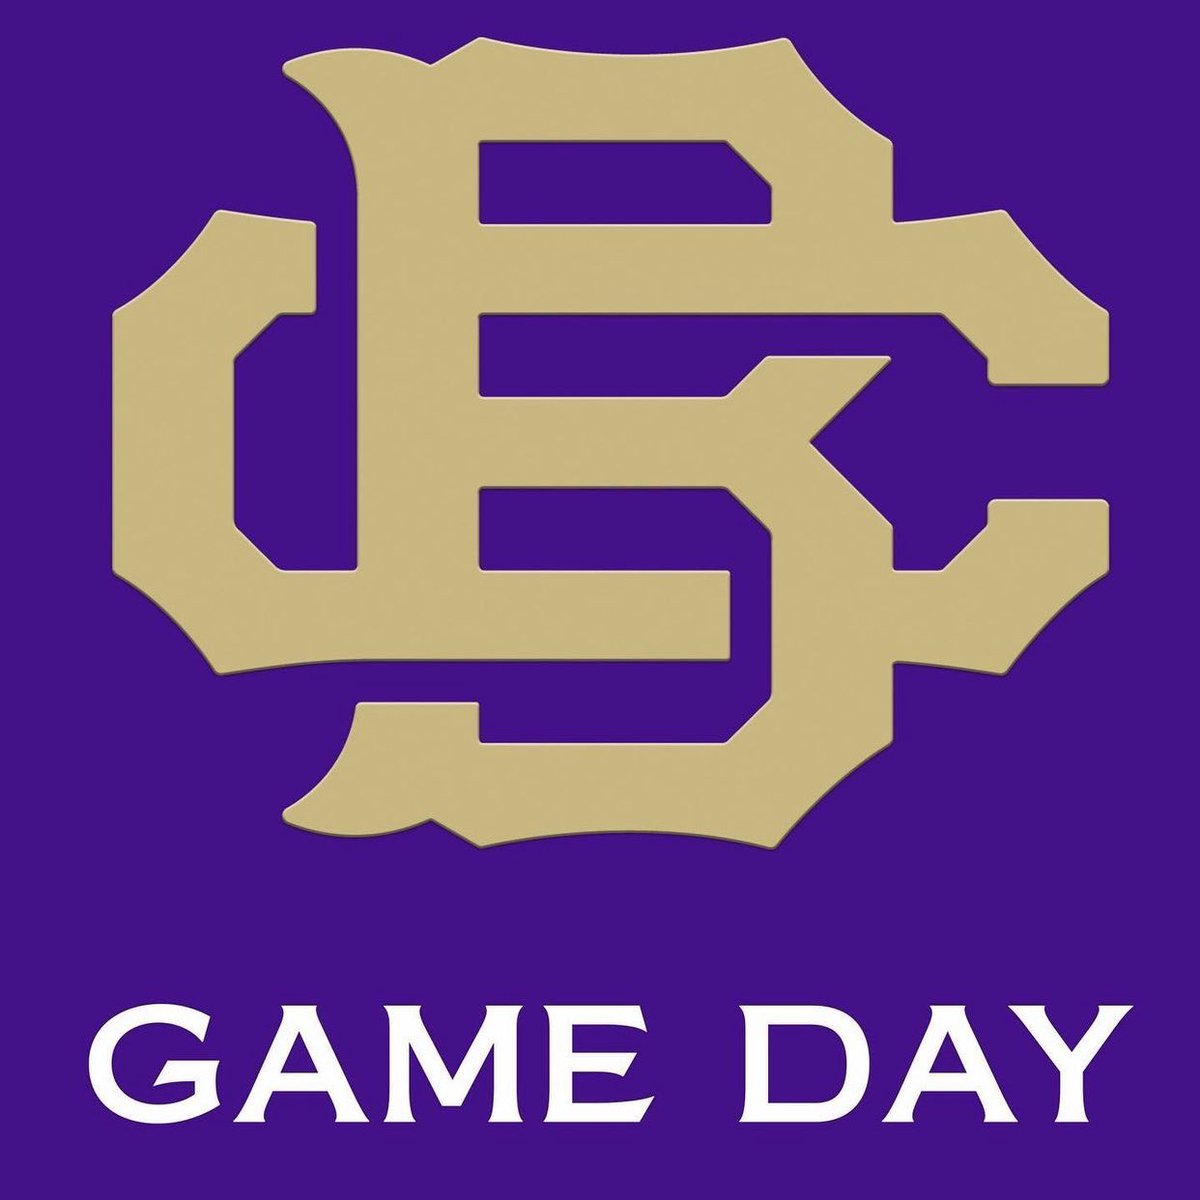 🚨GAMEDAY🚨
State Quarterfinals

🕐1pm
🆚Lipscomb Academy
📍Giacosa Field 

*Win and play at 3:30pm*

#LetsGoBoys